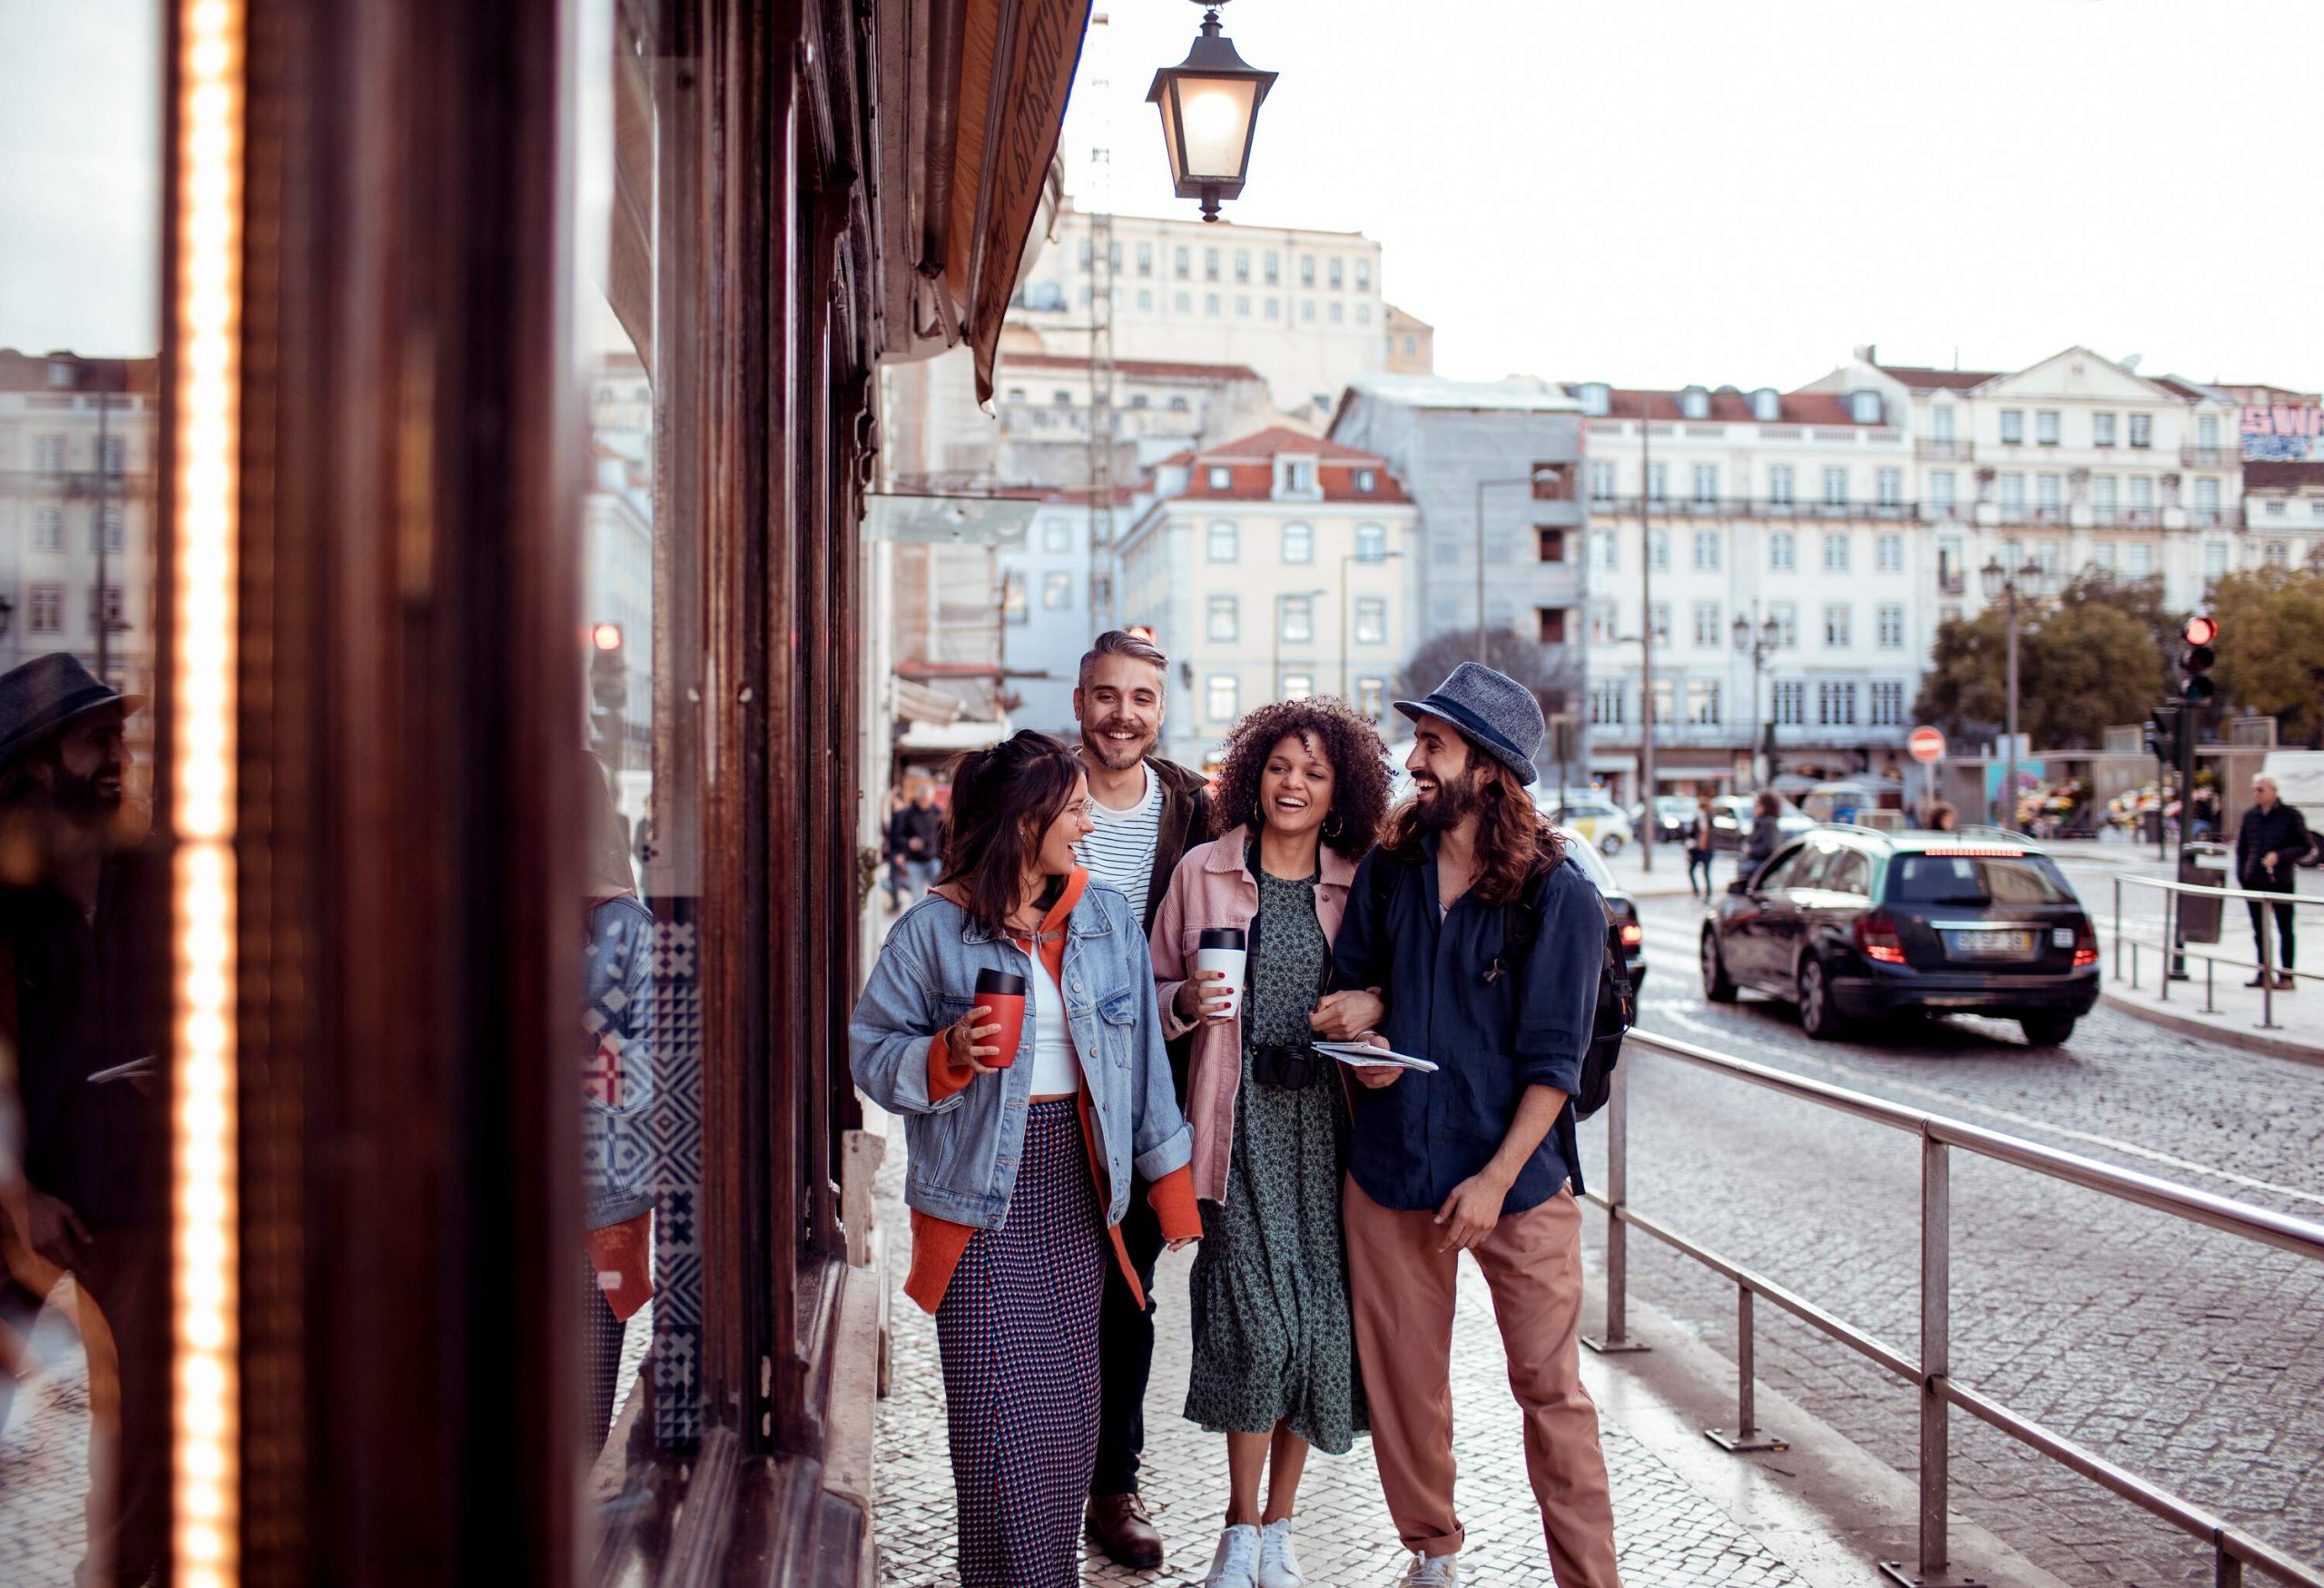 A group of friends laughing as they walk on a city sidewalk.